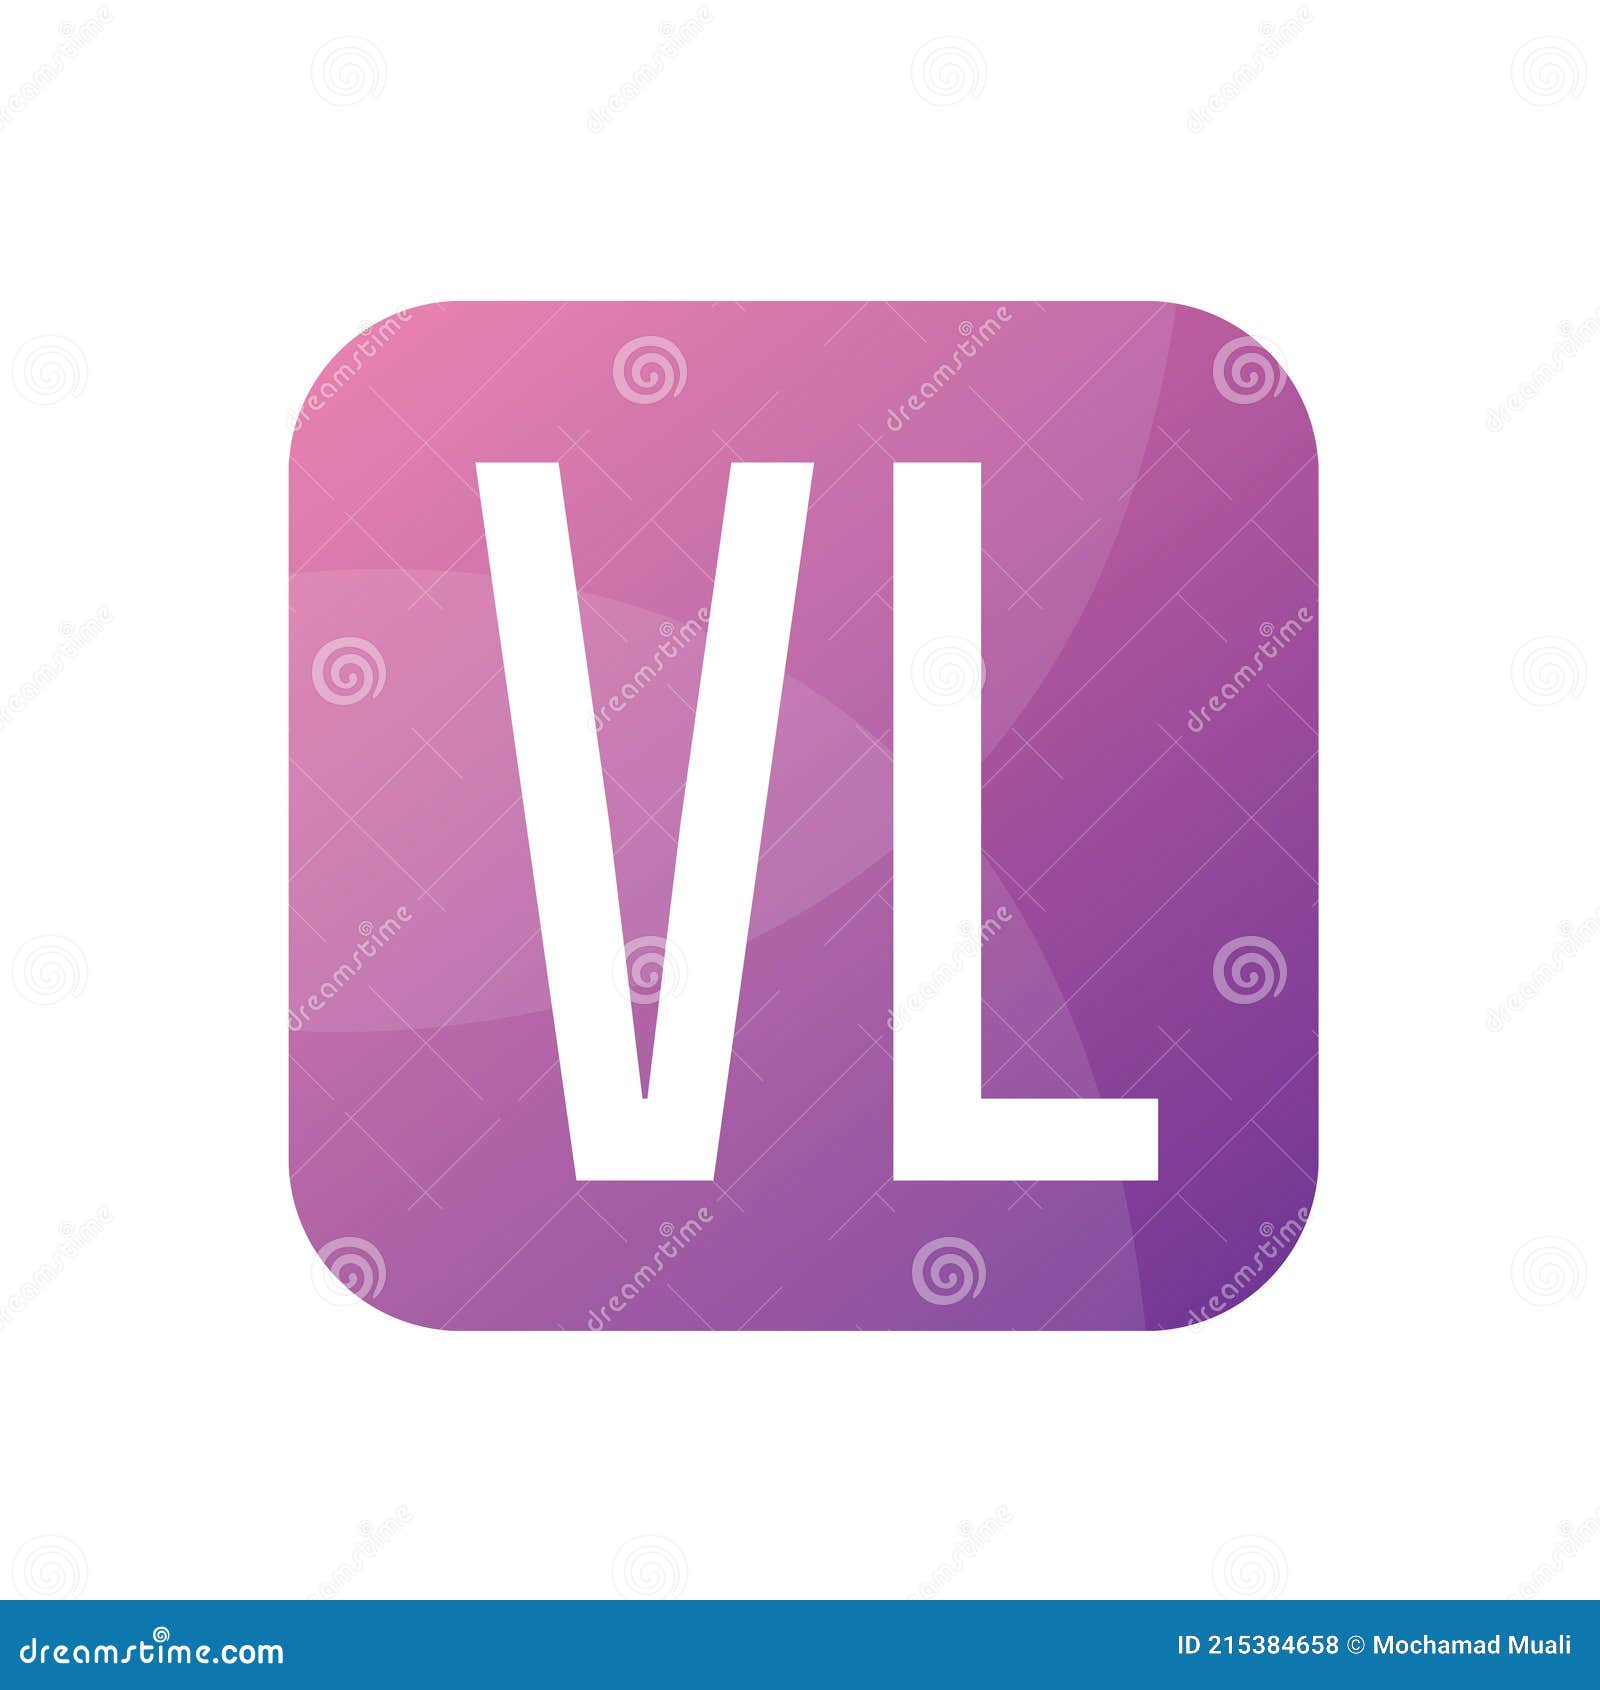 VL V L Letter Logo with Pink Purple Color and Particles Dots Design., Stock vector